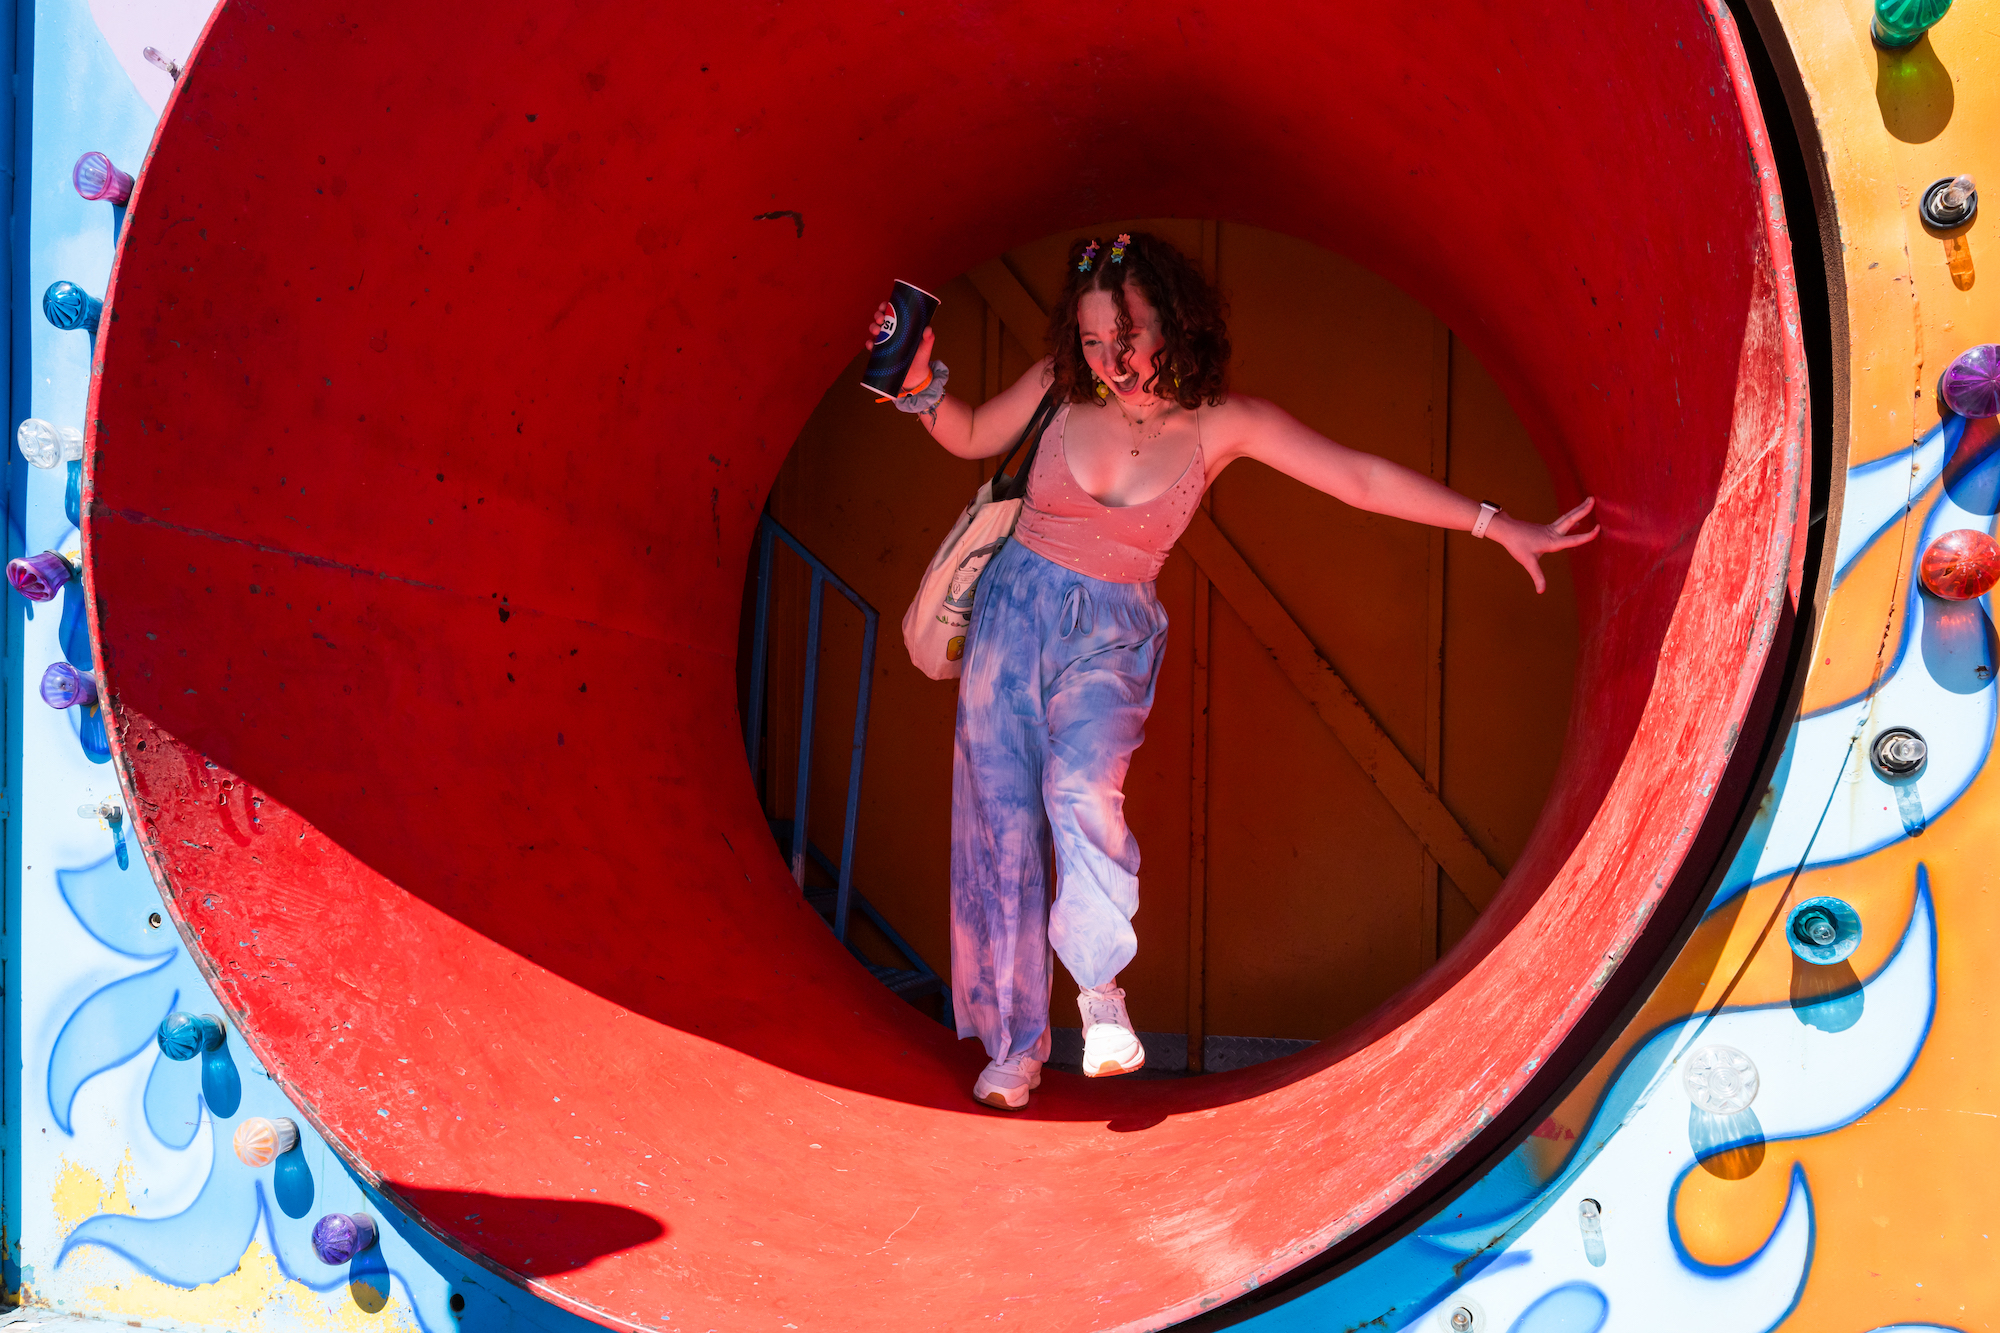 Student emerges from a rotating cylinder as part of a fun house